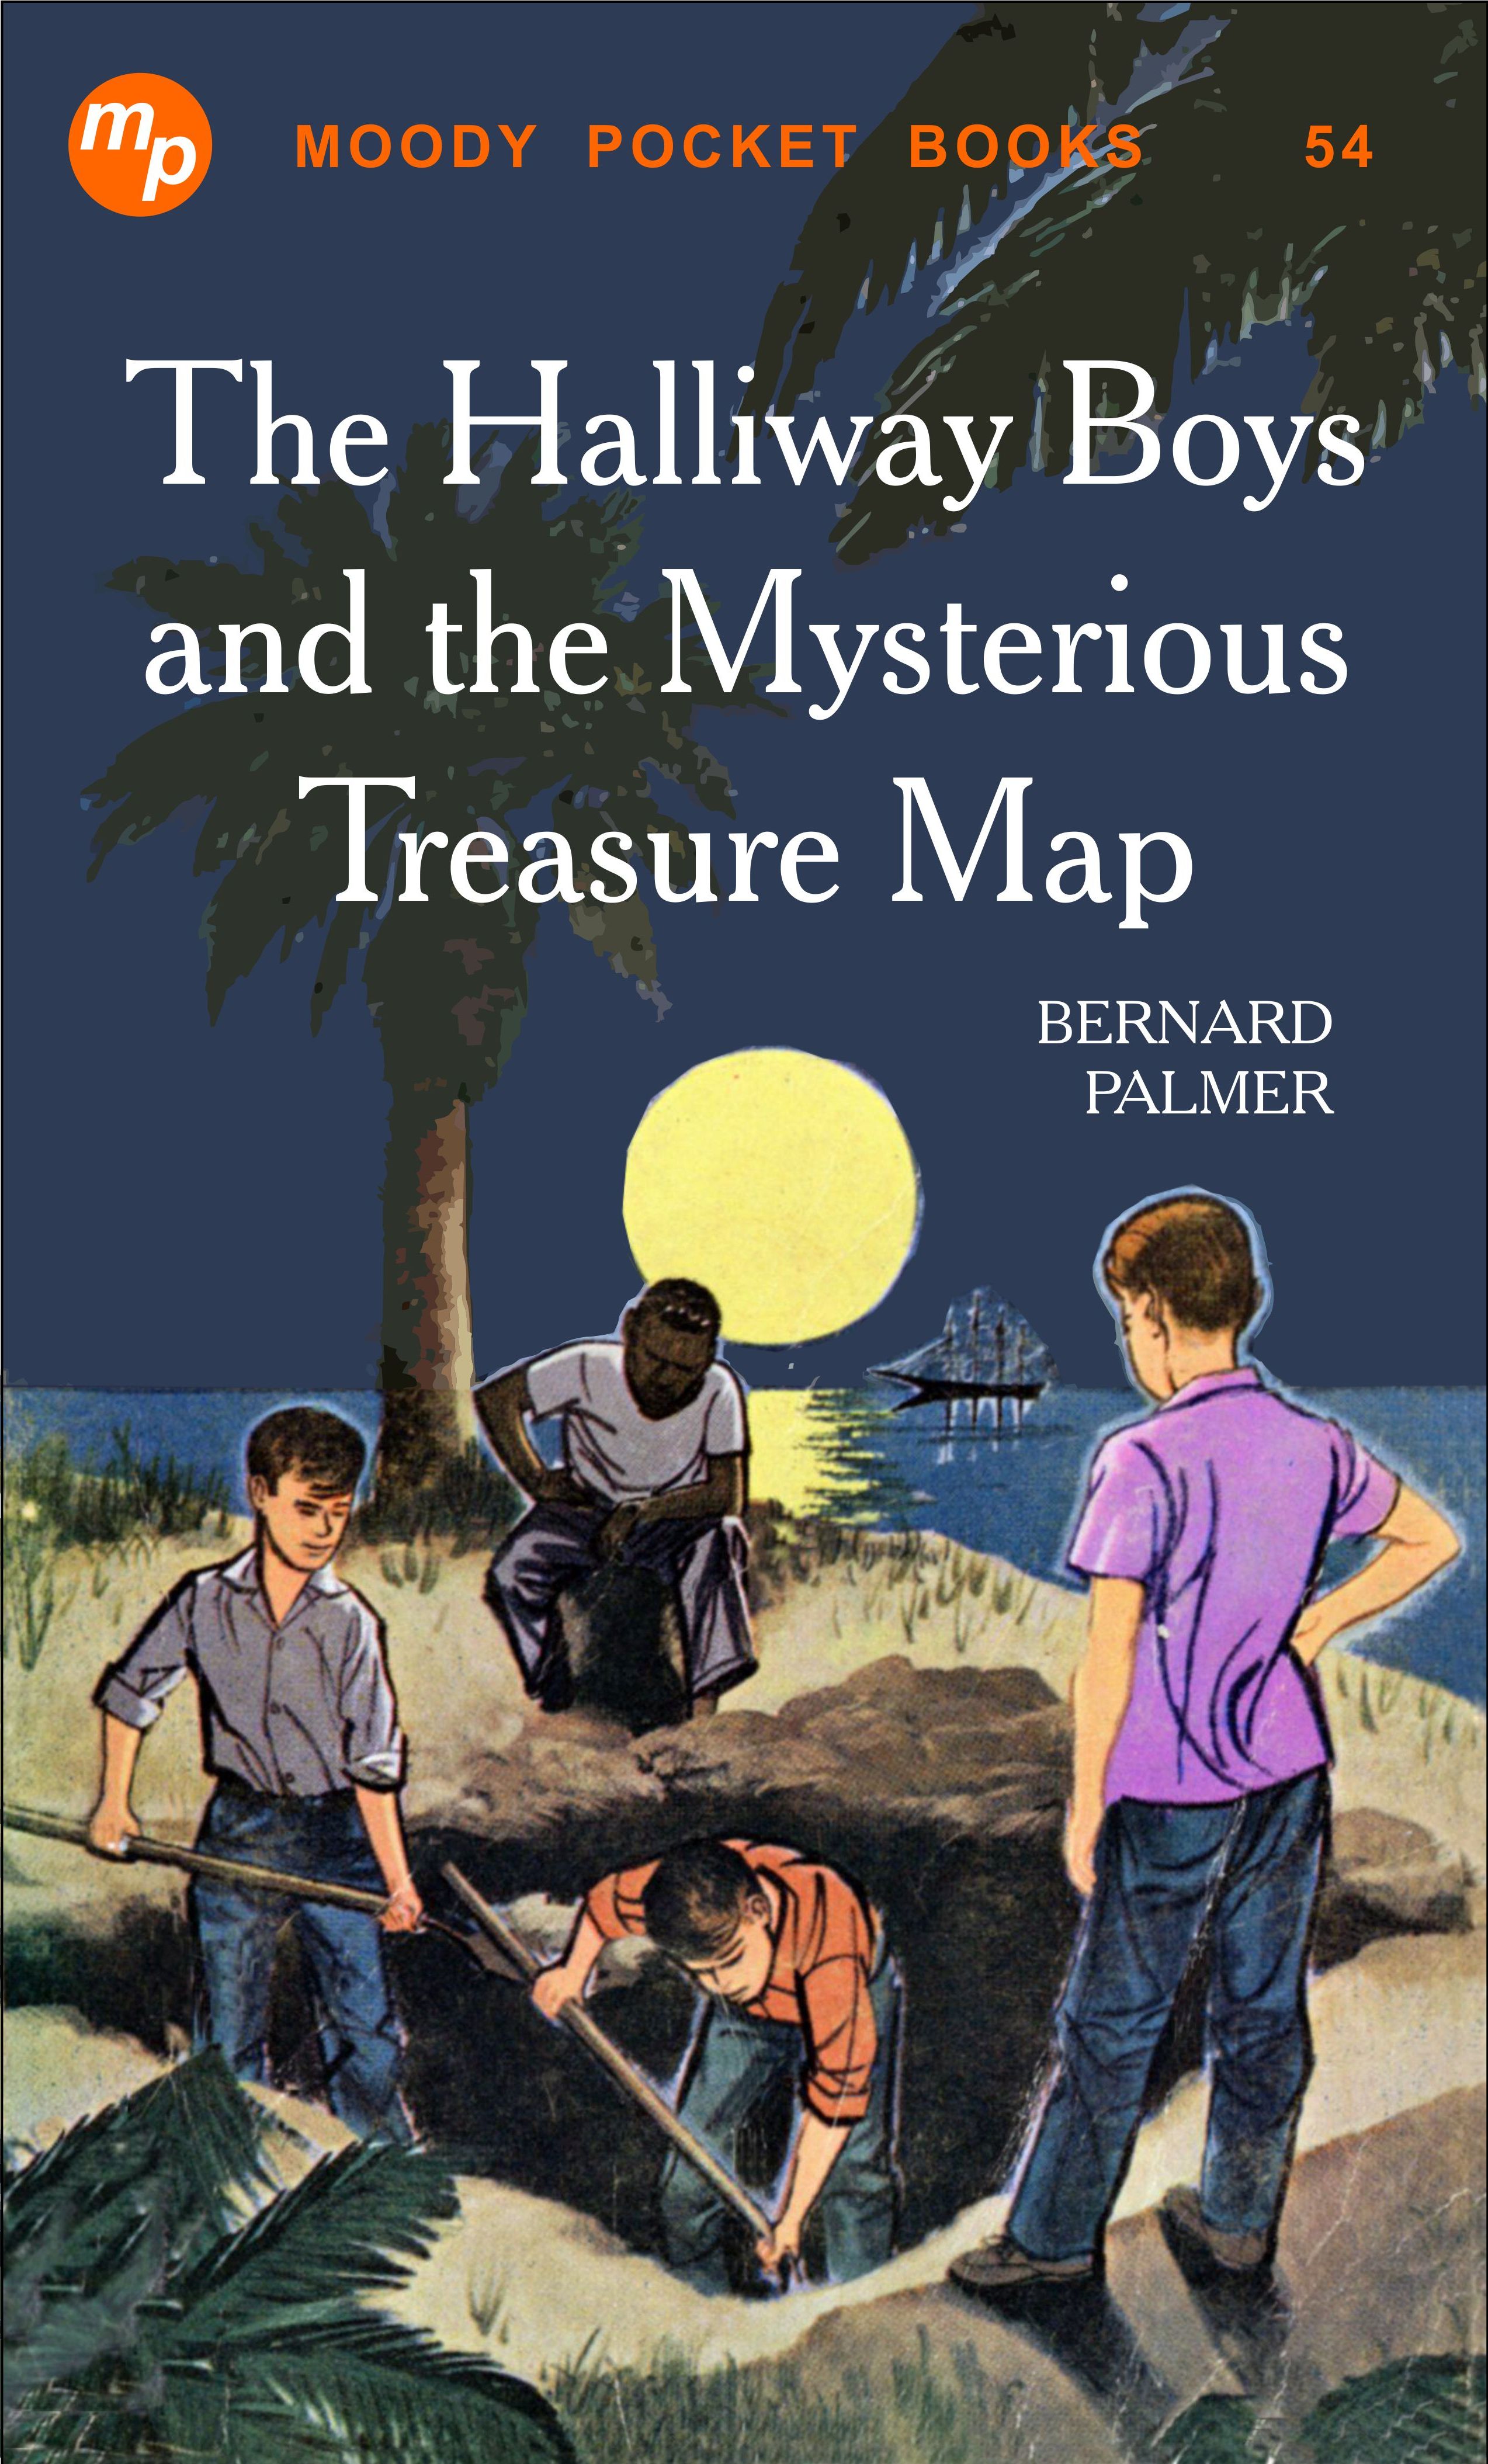 Halliway Boys and the Mysterious Treasure Map